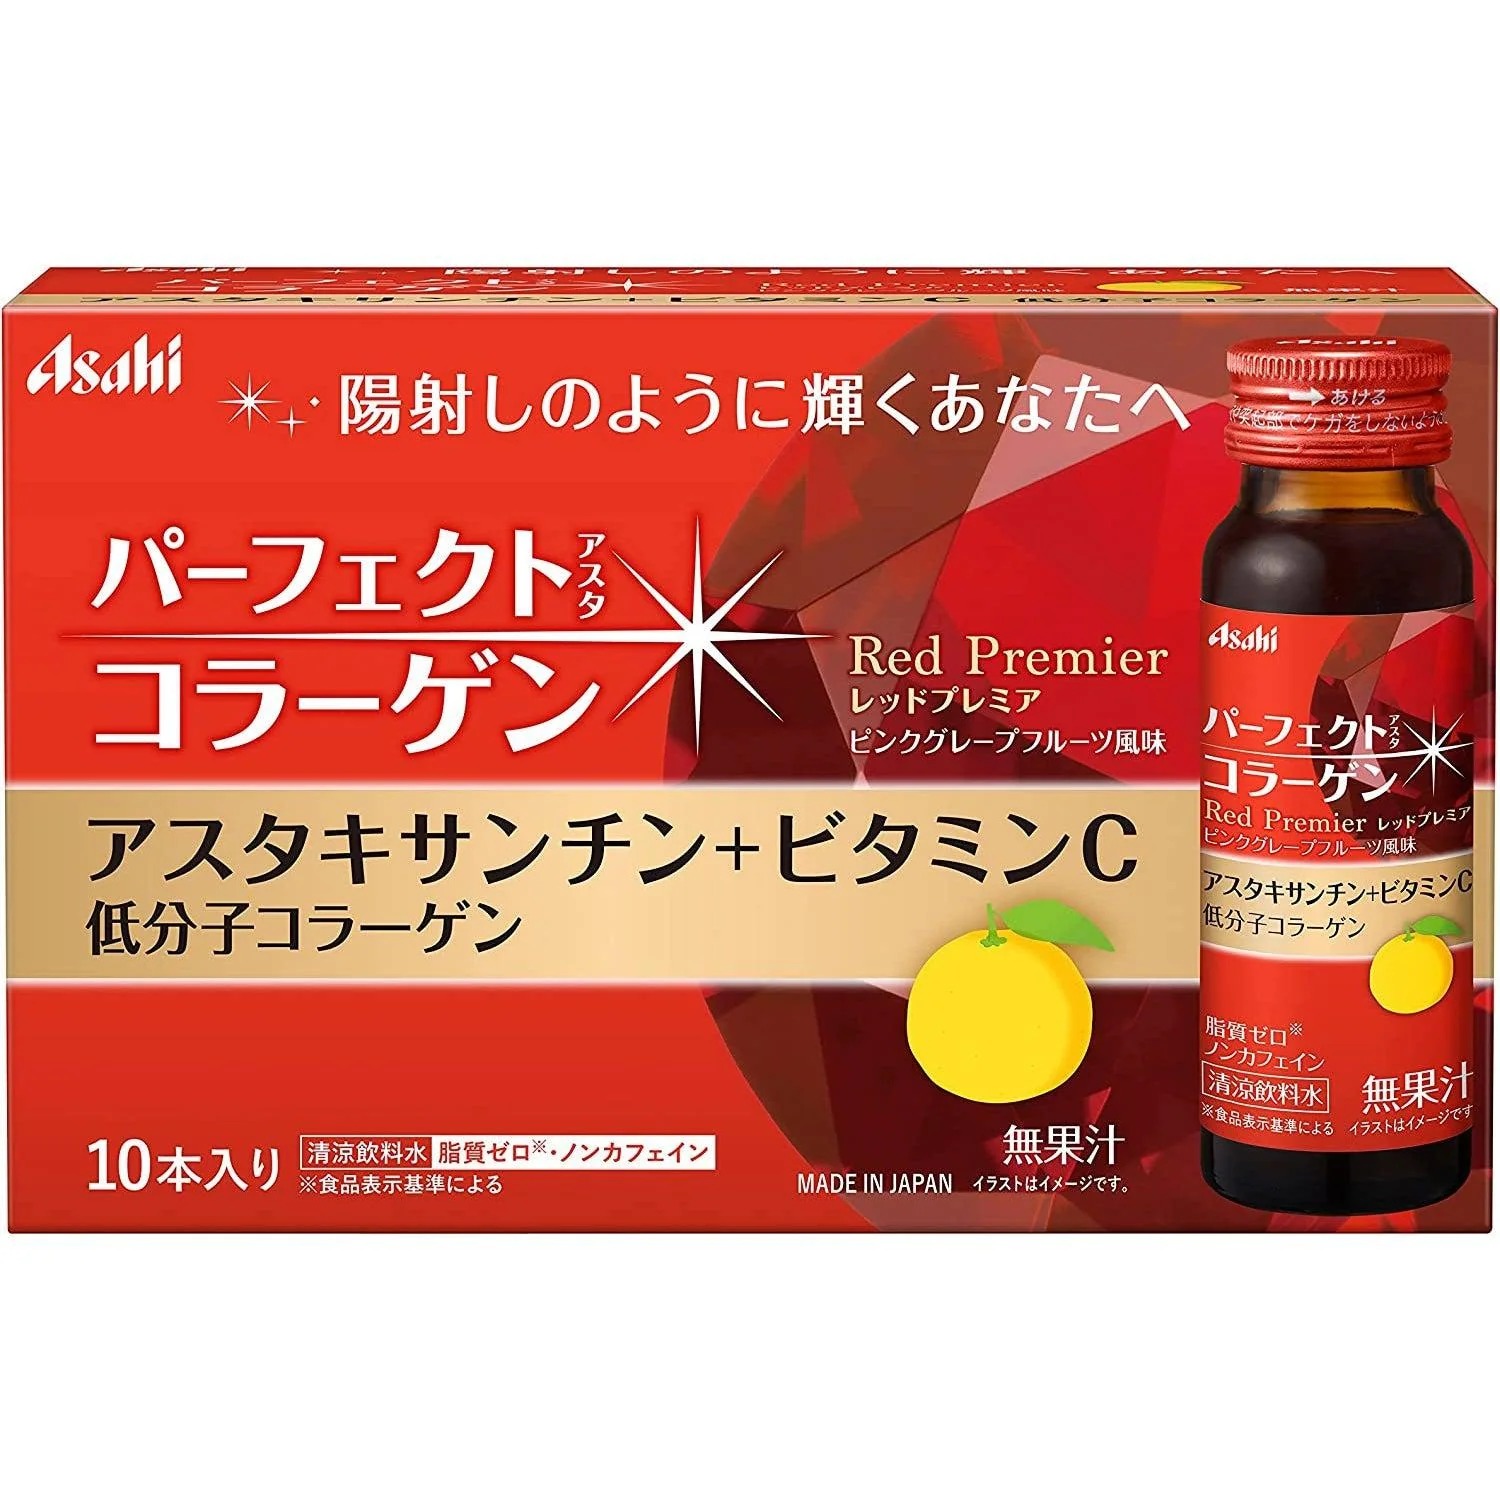 nuoc uong collagen Asahi Perfect Asta Collagen Red